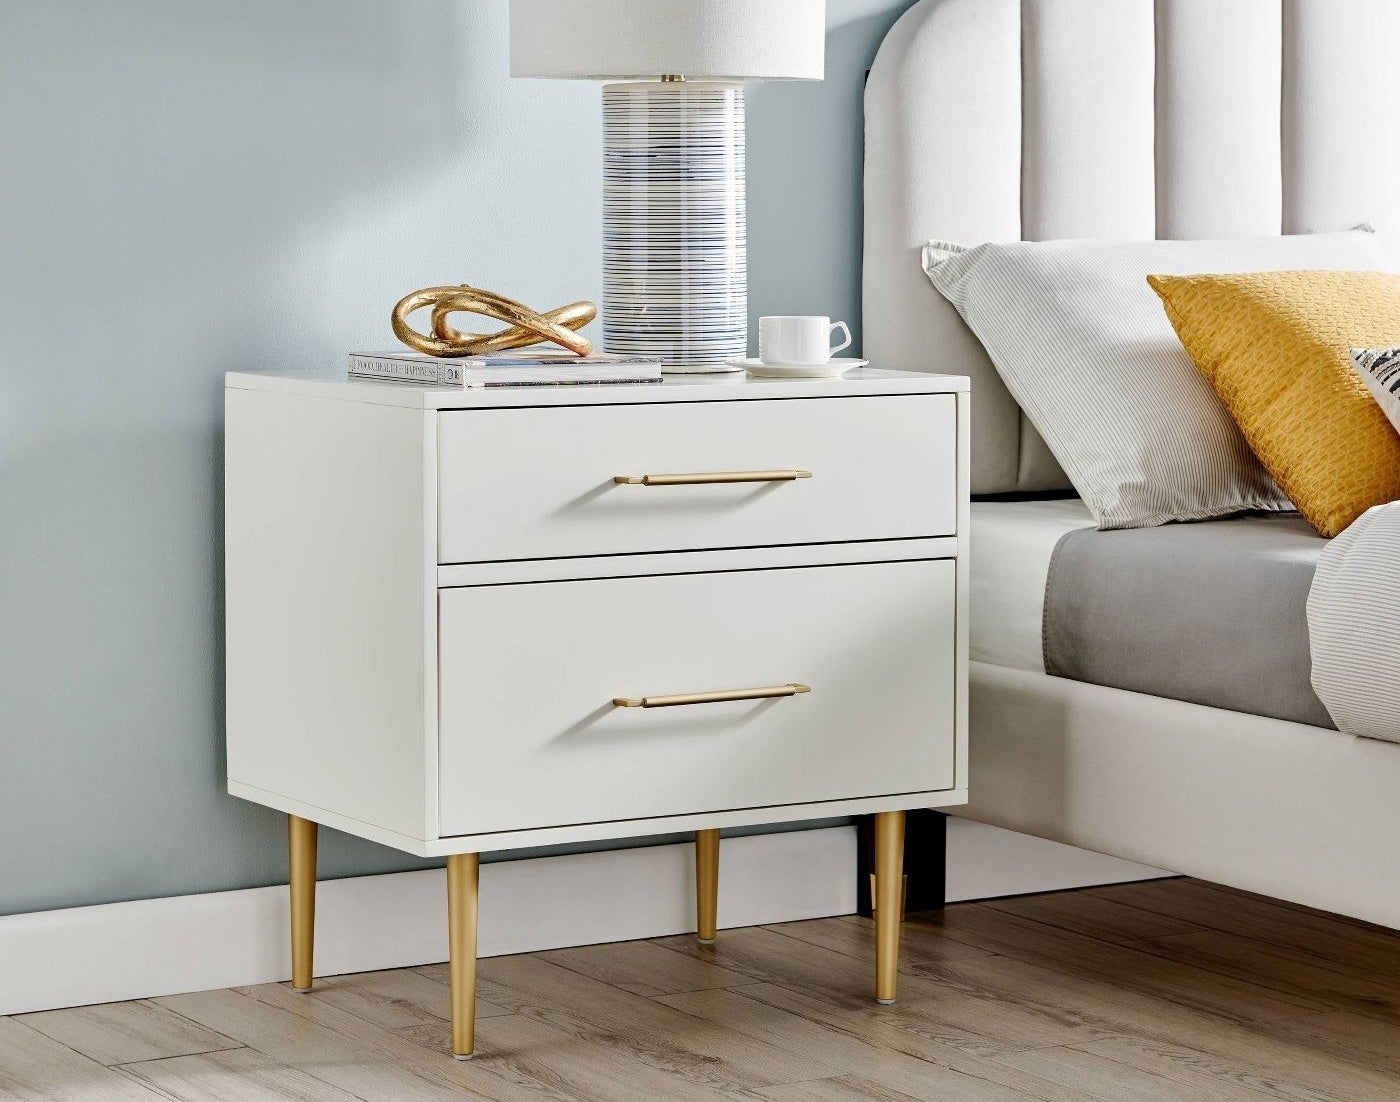 A white two drawer nightstand with brass handles and legs